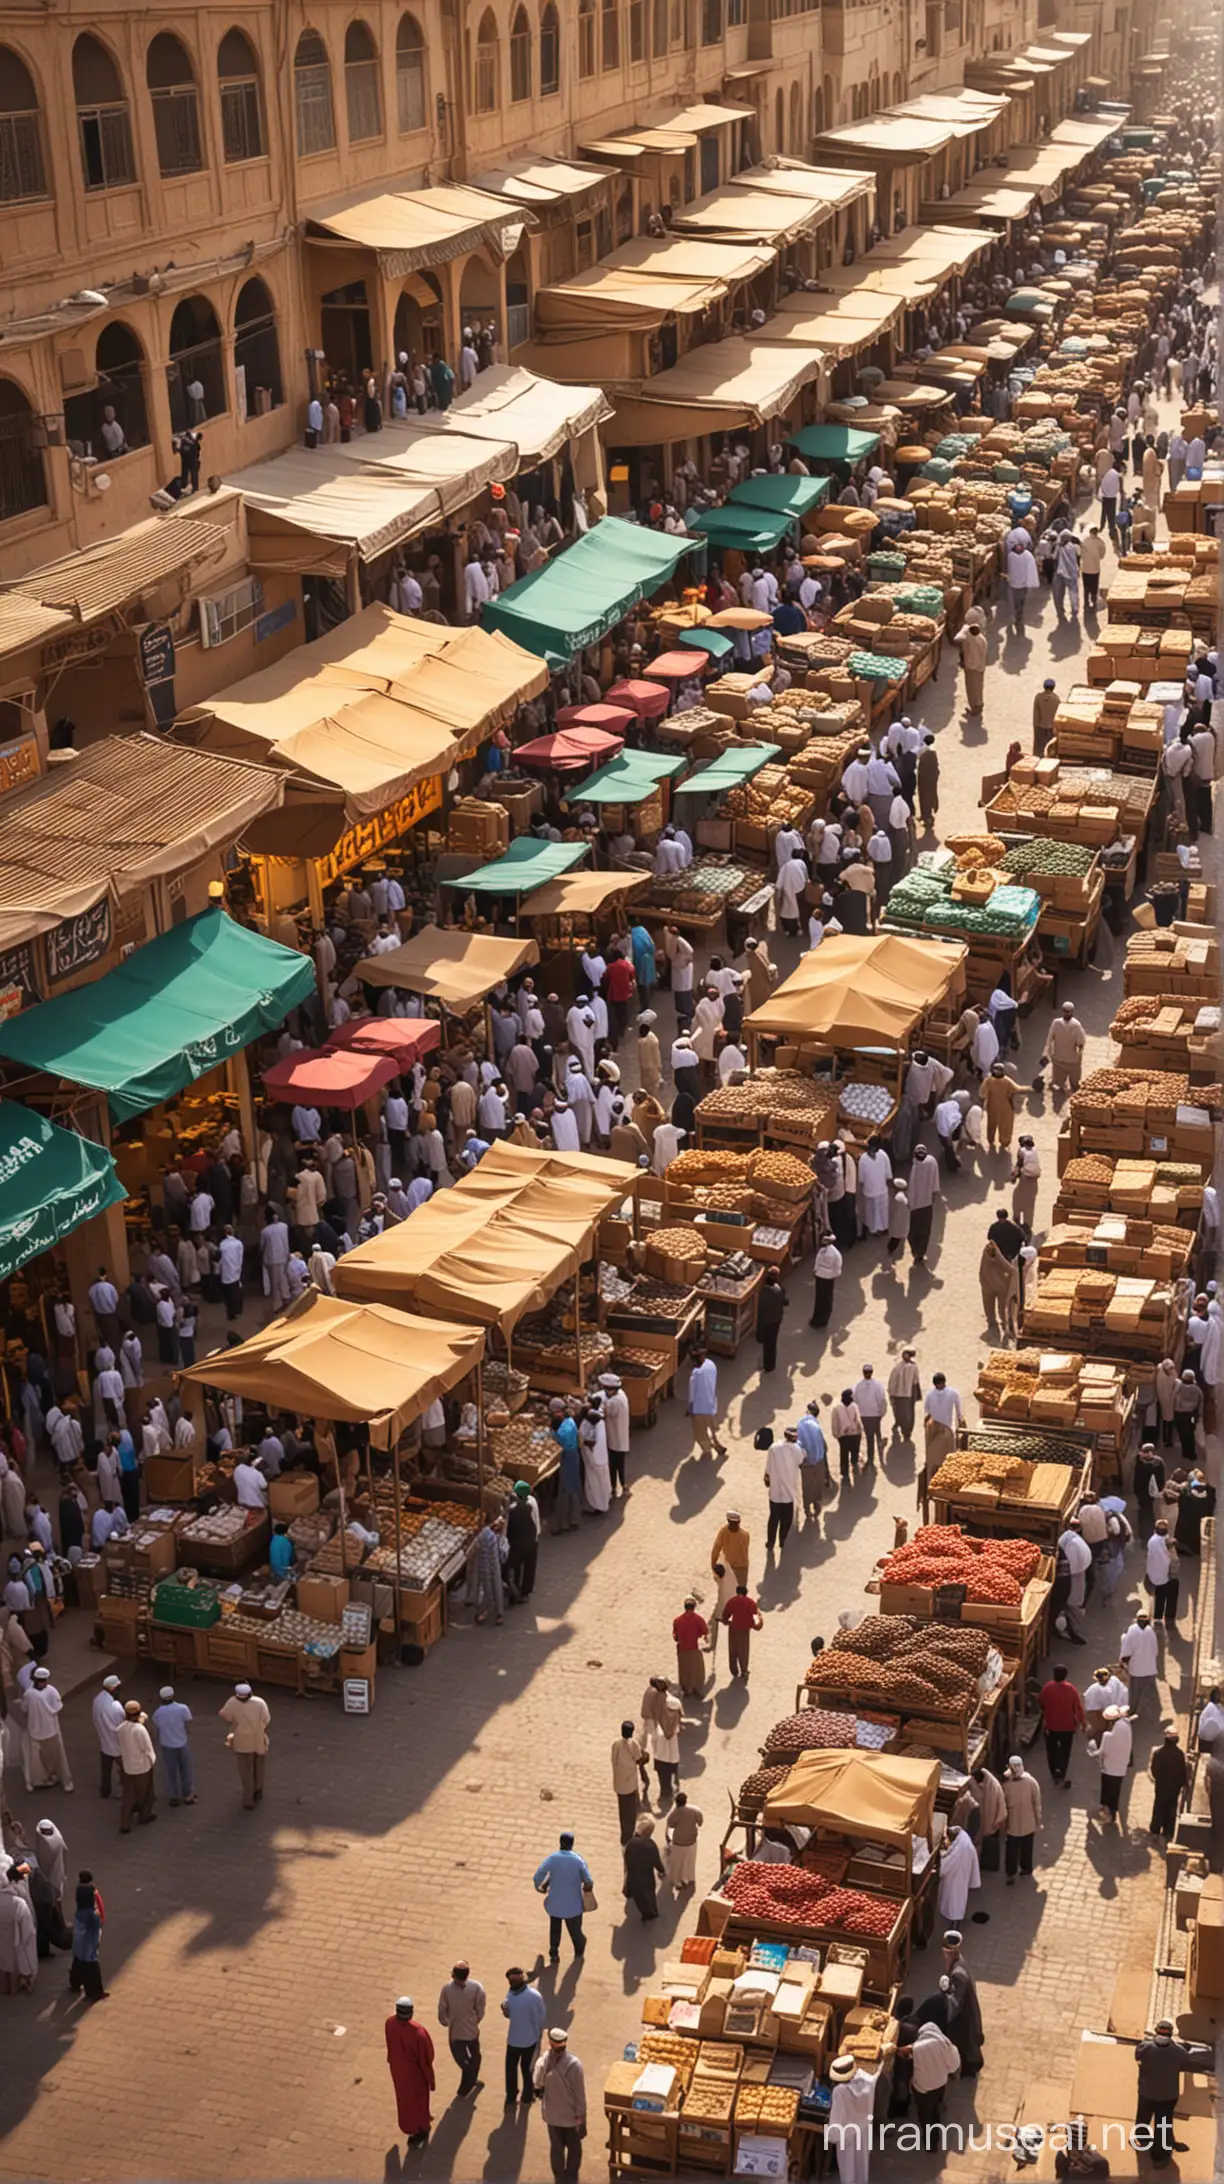 Create an image of a bustling Arabian market where coffee is being traded and sold.